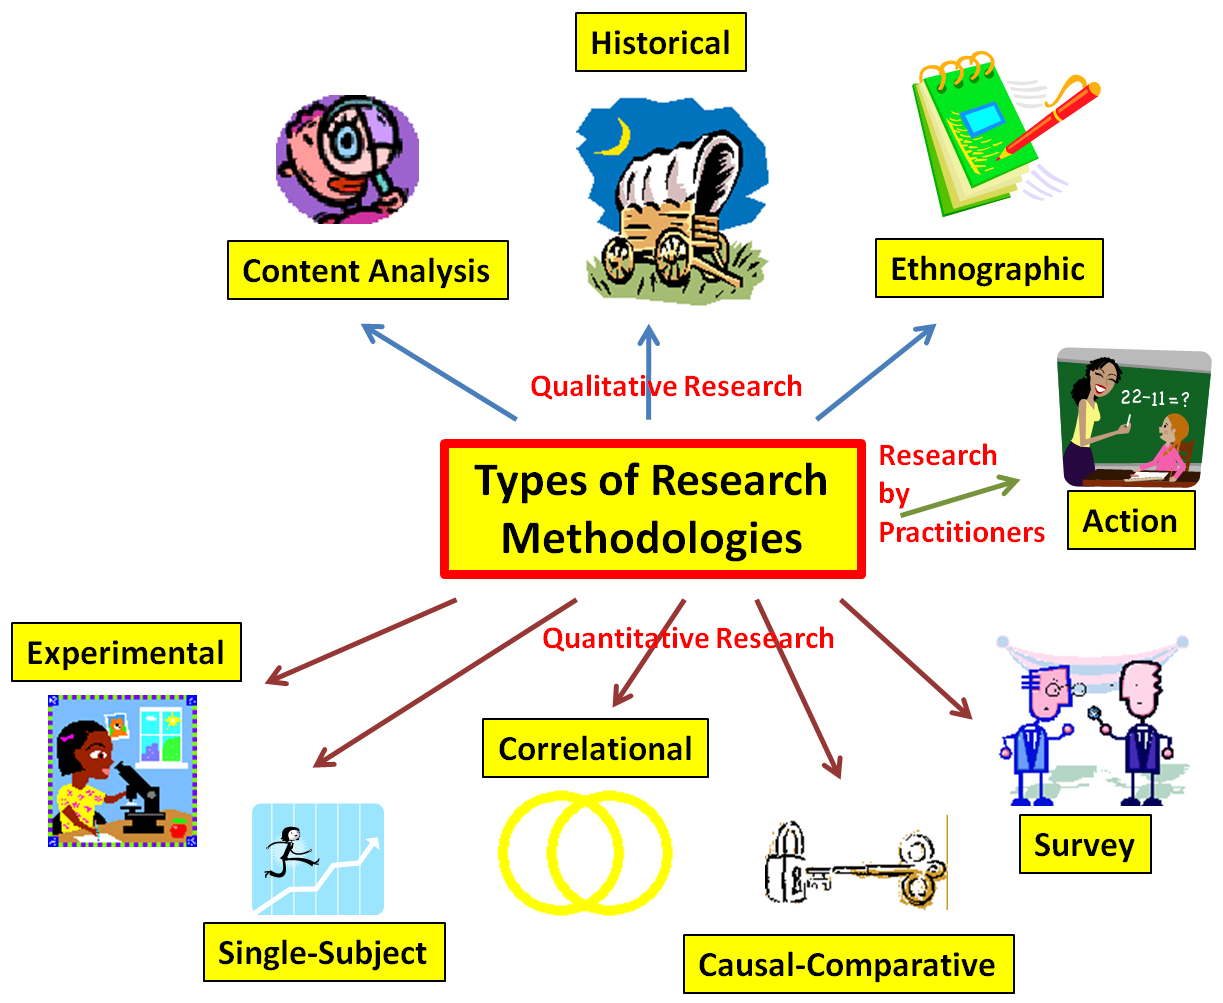 Type of research